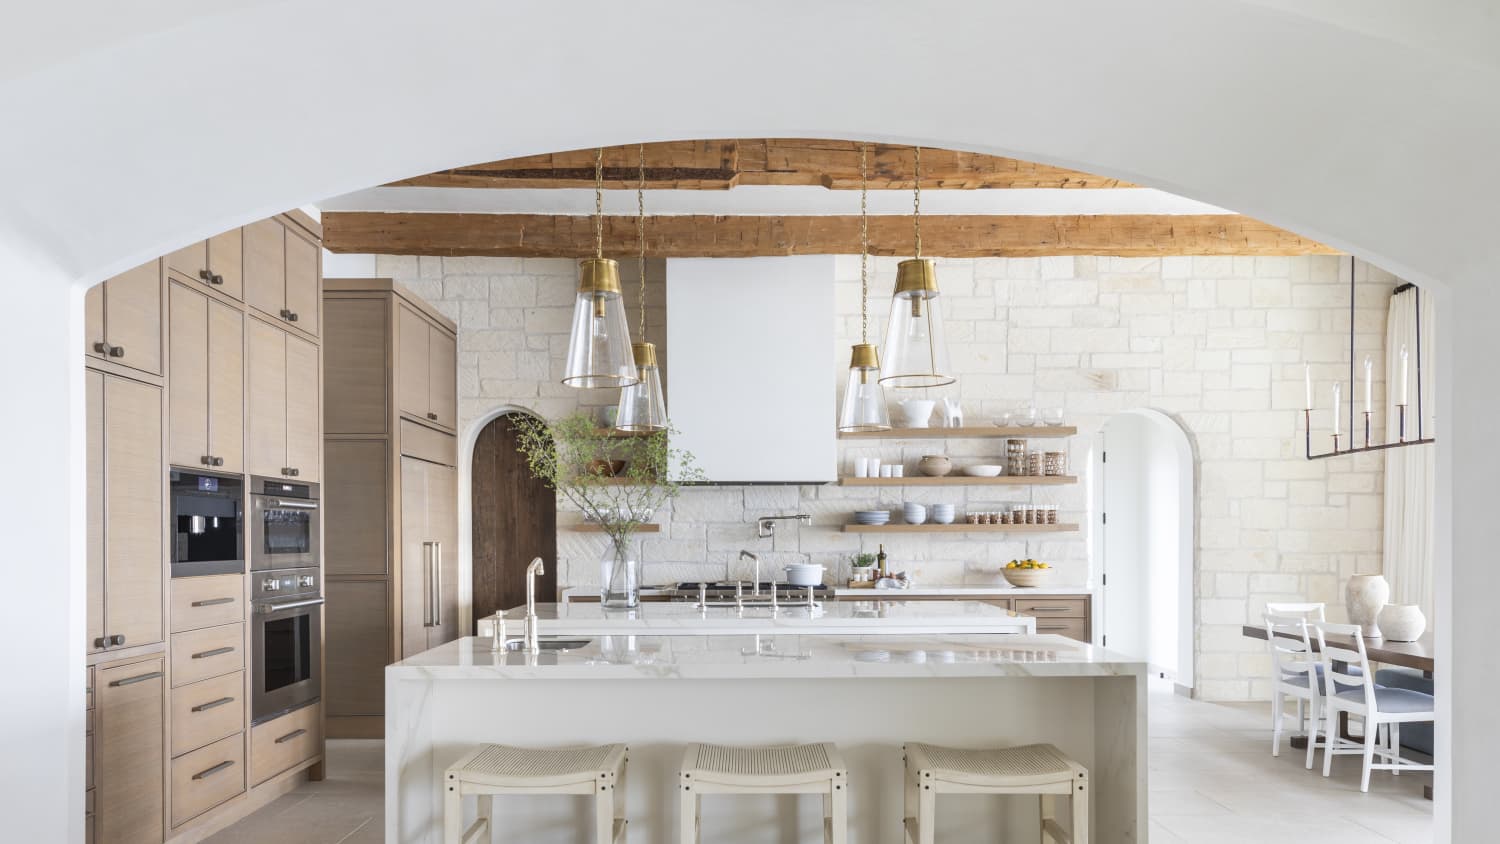 20 Kitchen Trends for 20, According to Design Experts   Kitchn